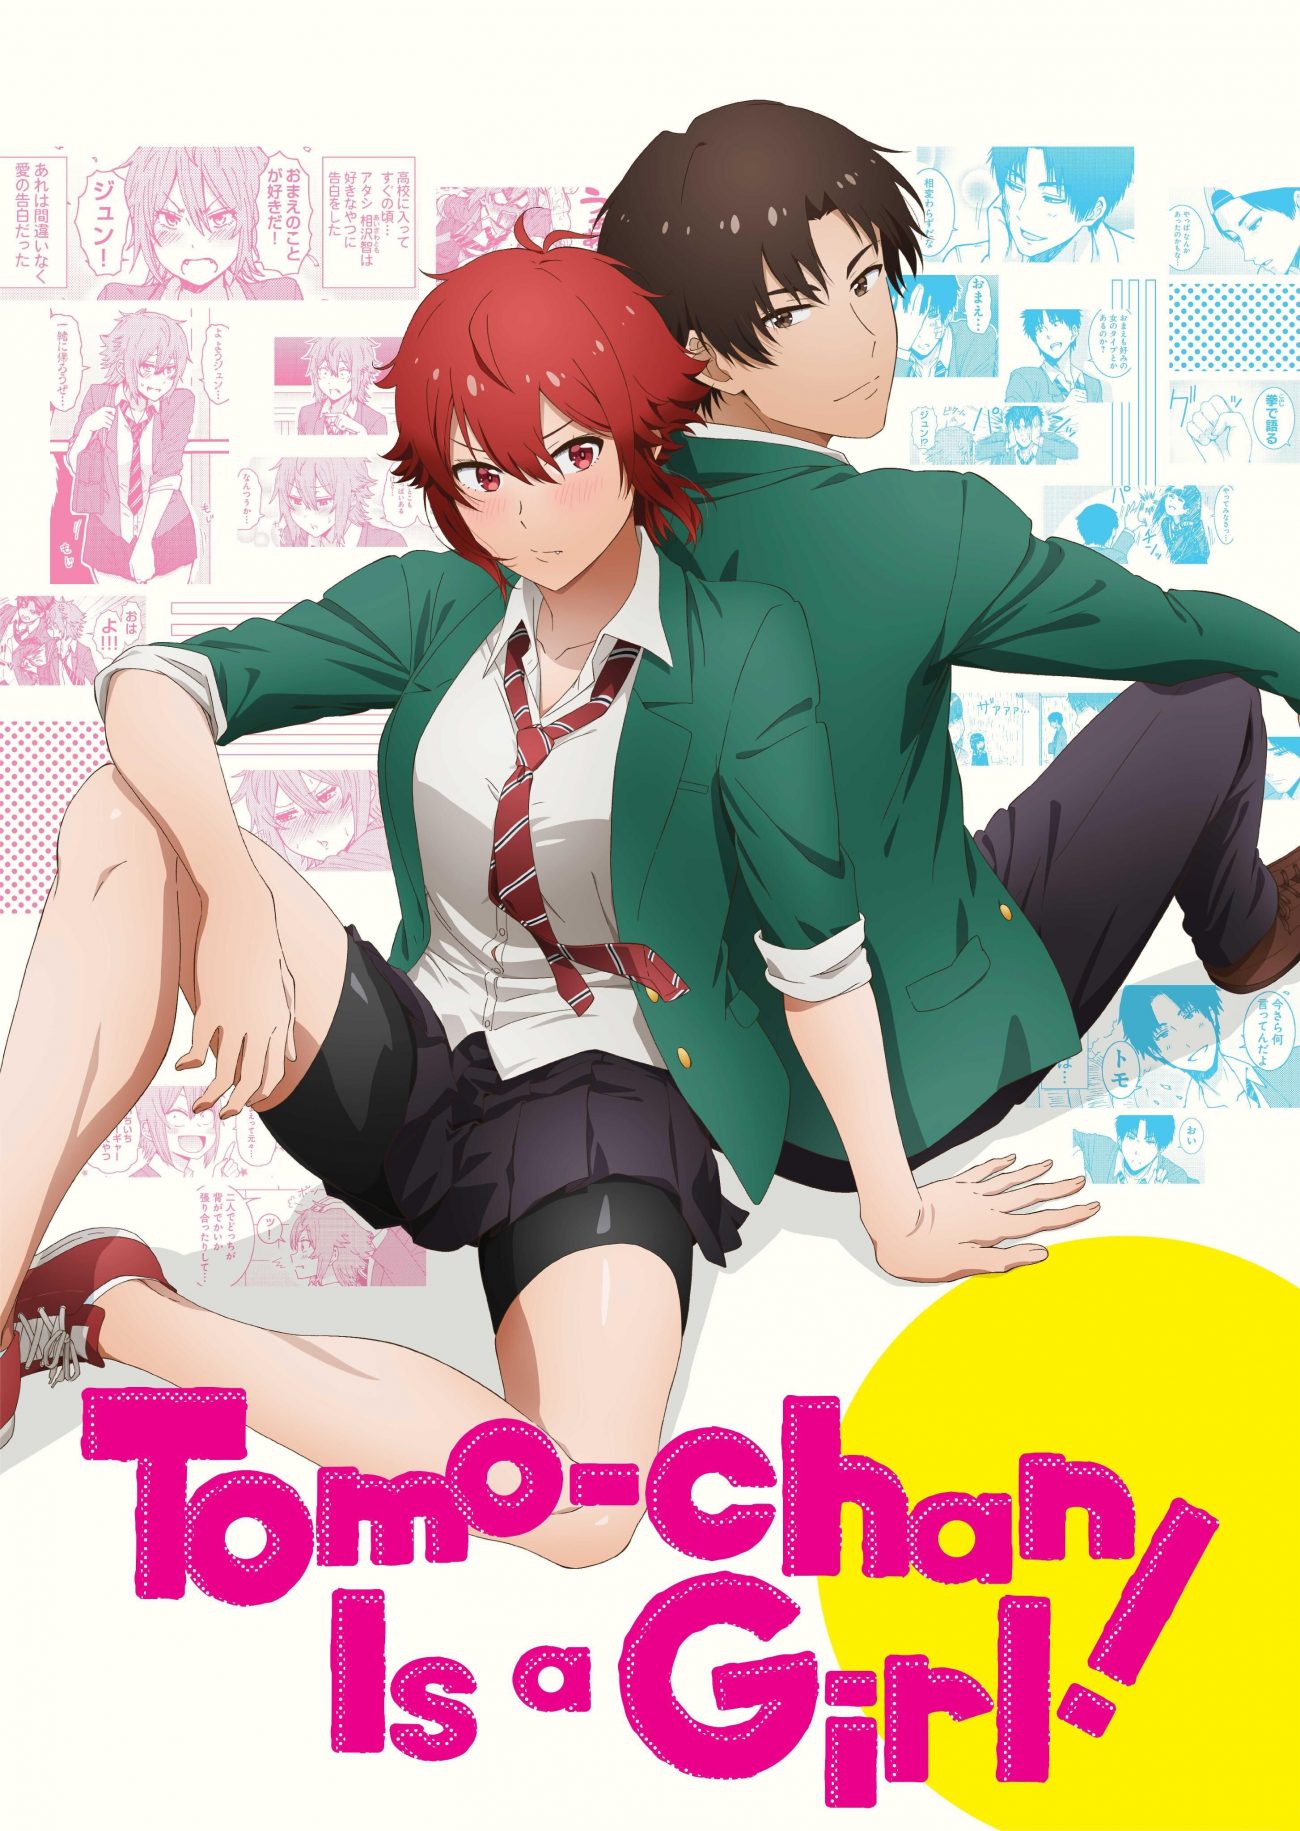 Tomo-chan is a Girl! episode 1- Misuzu wants Tomo to be more girly, Tomo  makes new friends